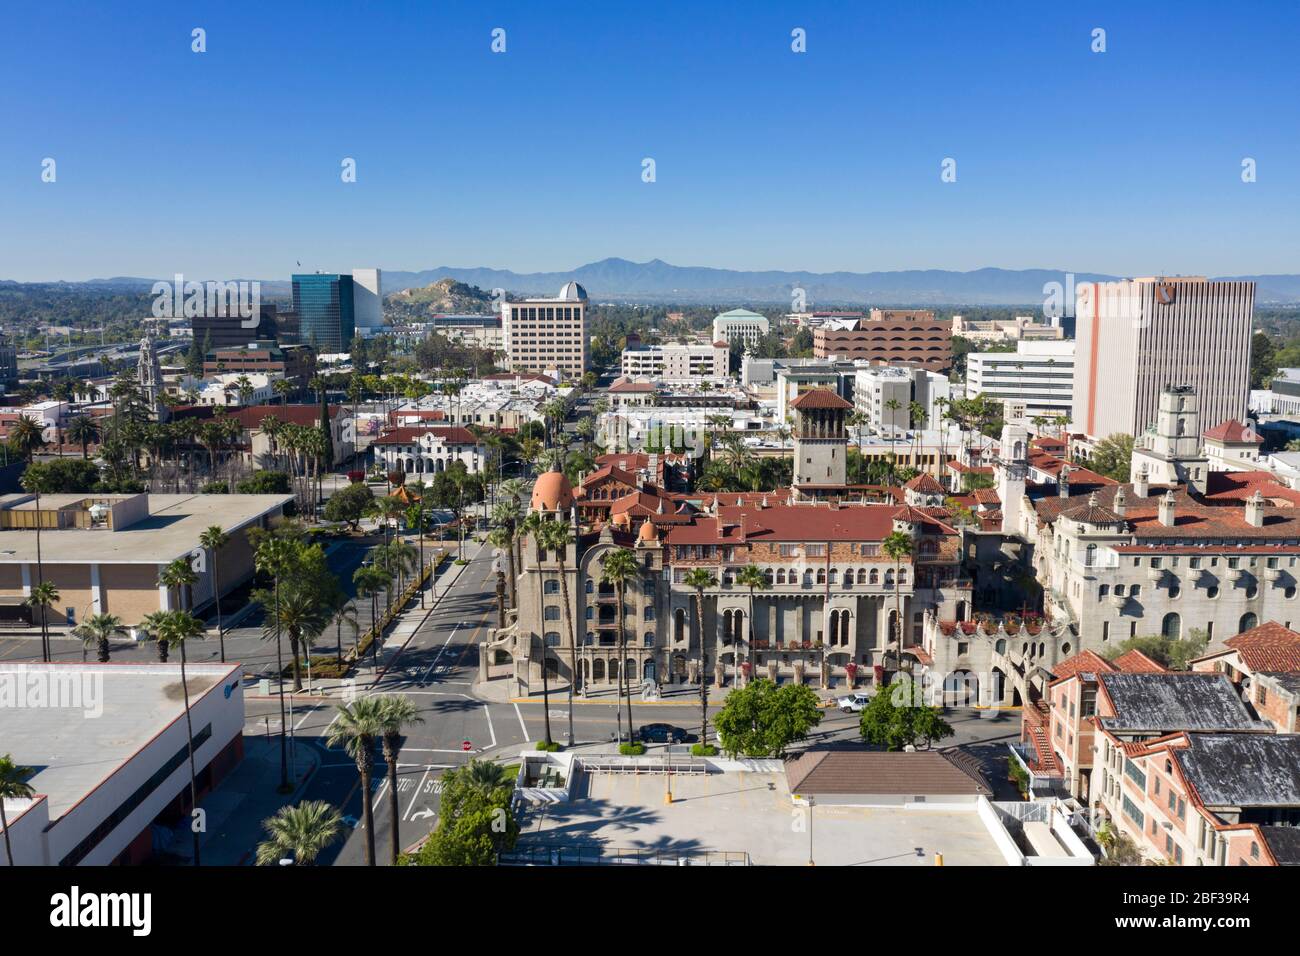 Aerial views of the Mission Inn hotel in downtown Riverside, California Stock Photo